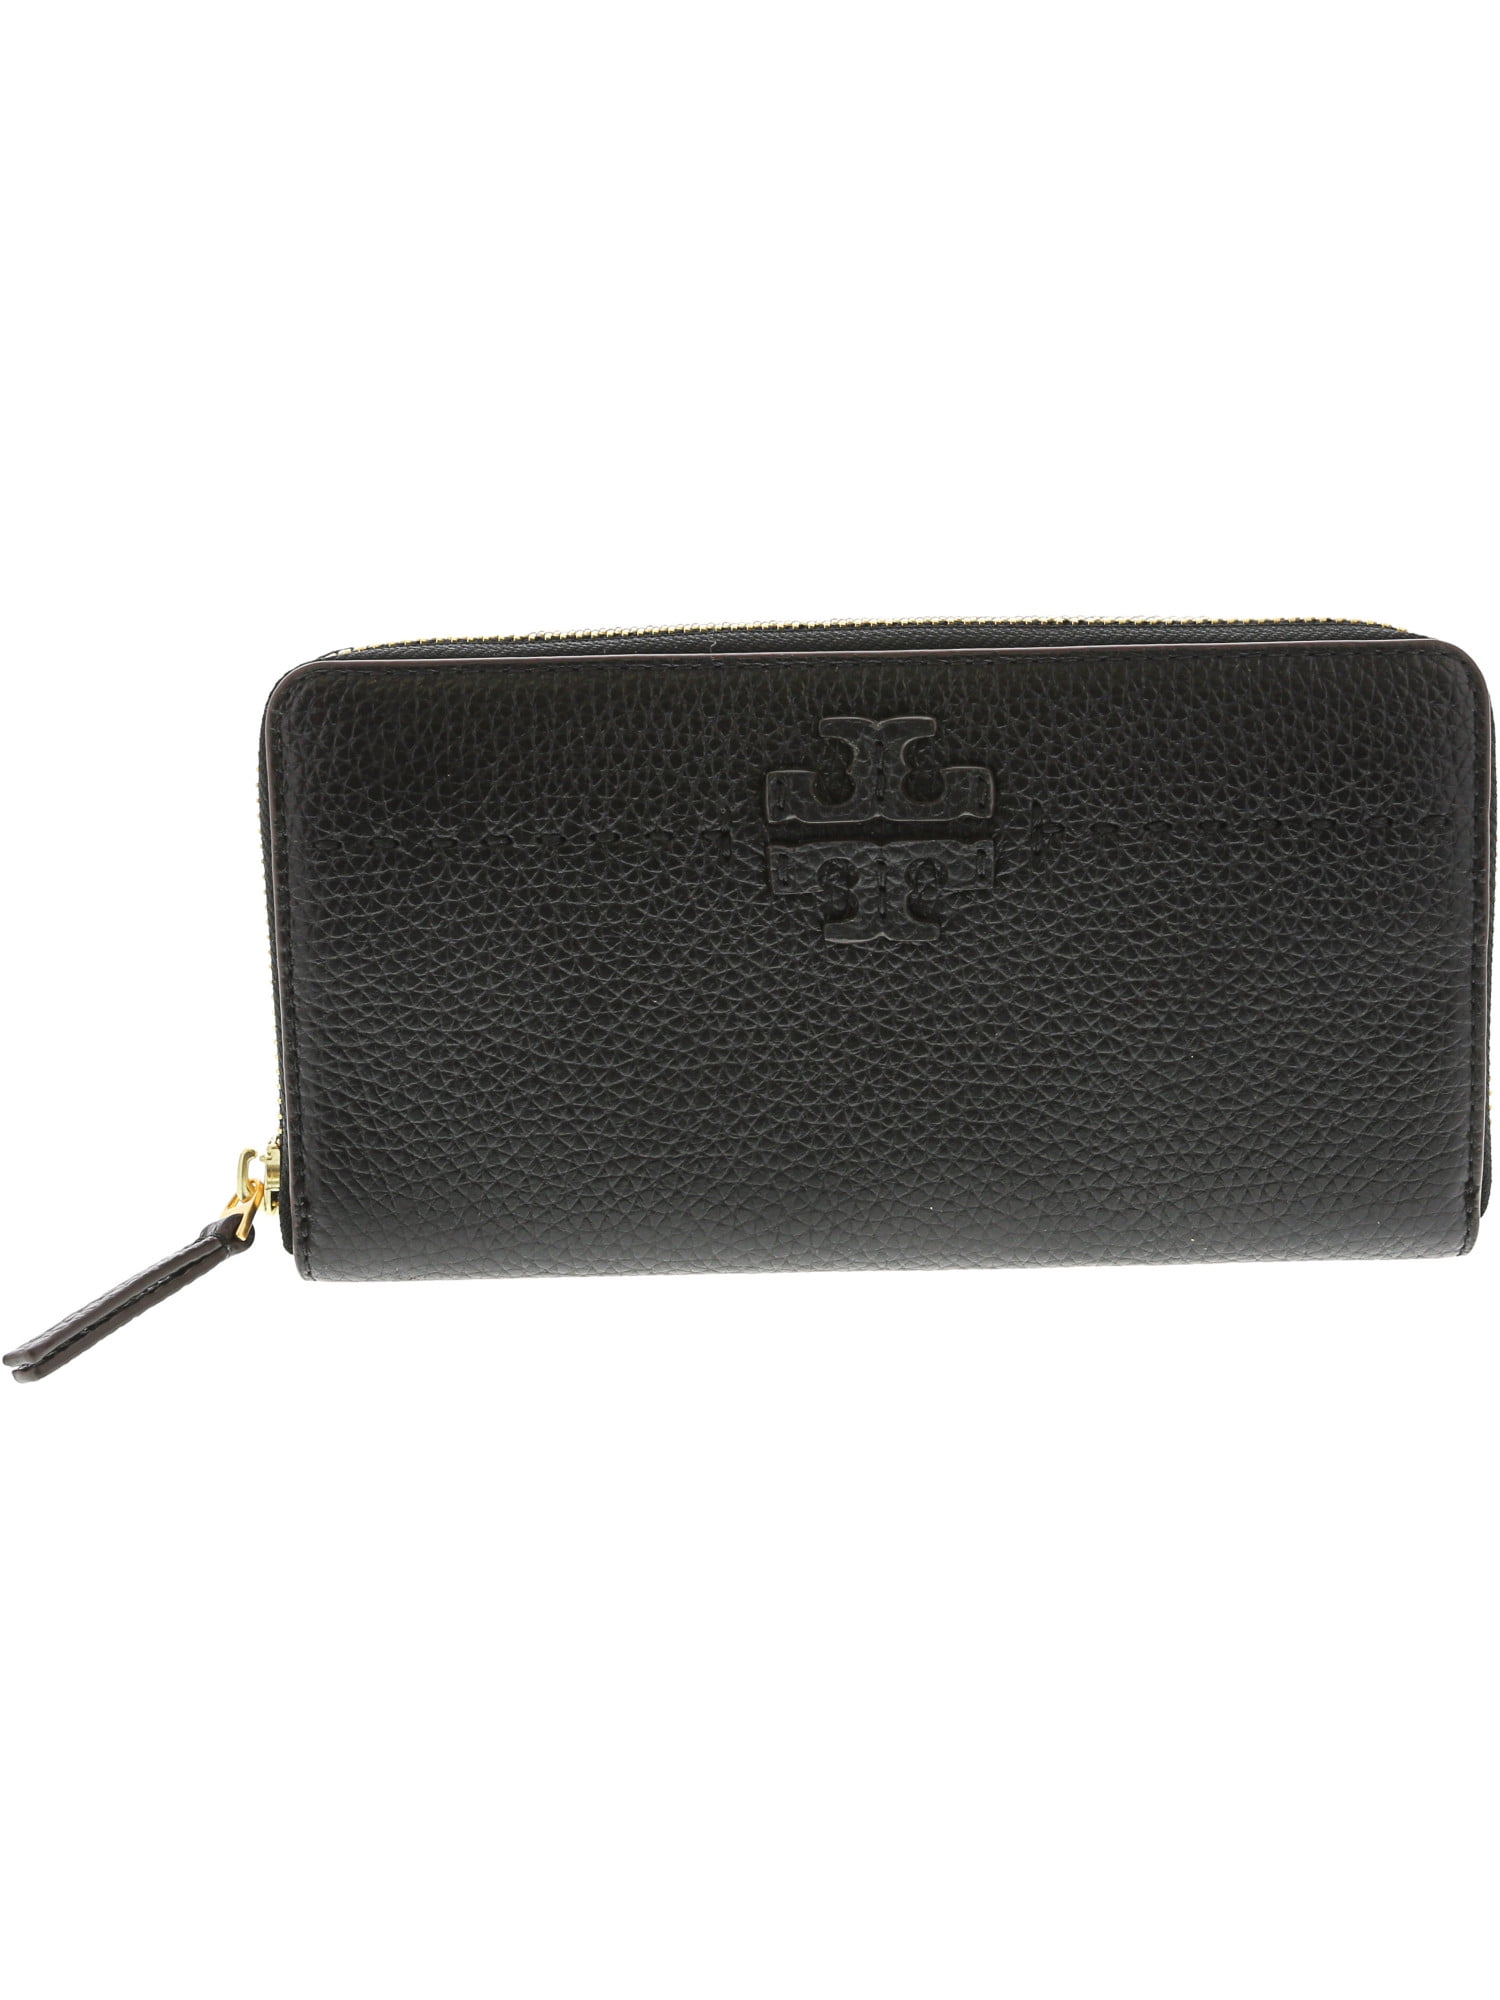 Tory Burch Women's Mcgraw Zip Continental Leather Wallet - Black